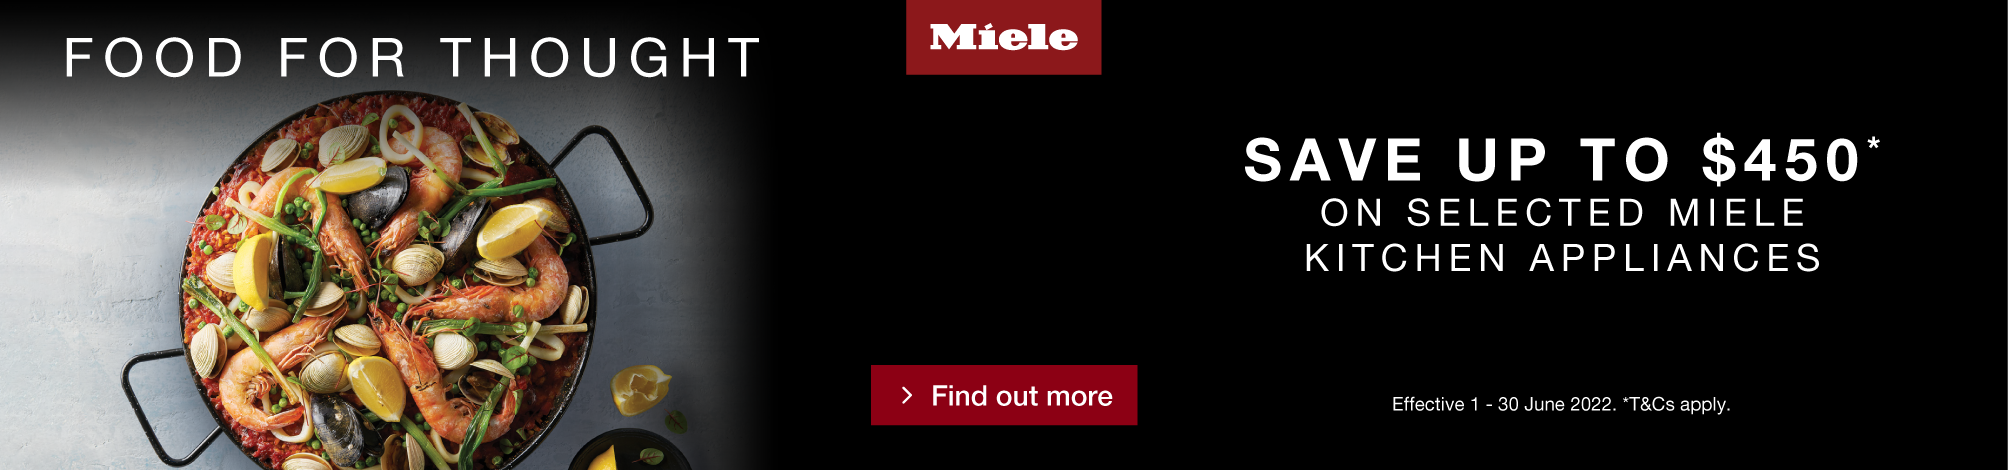 Save up to $450 on selected Miele Kitchen Appliances